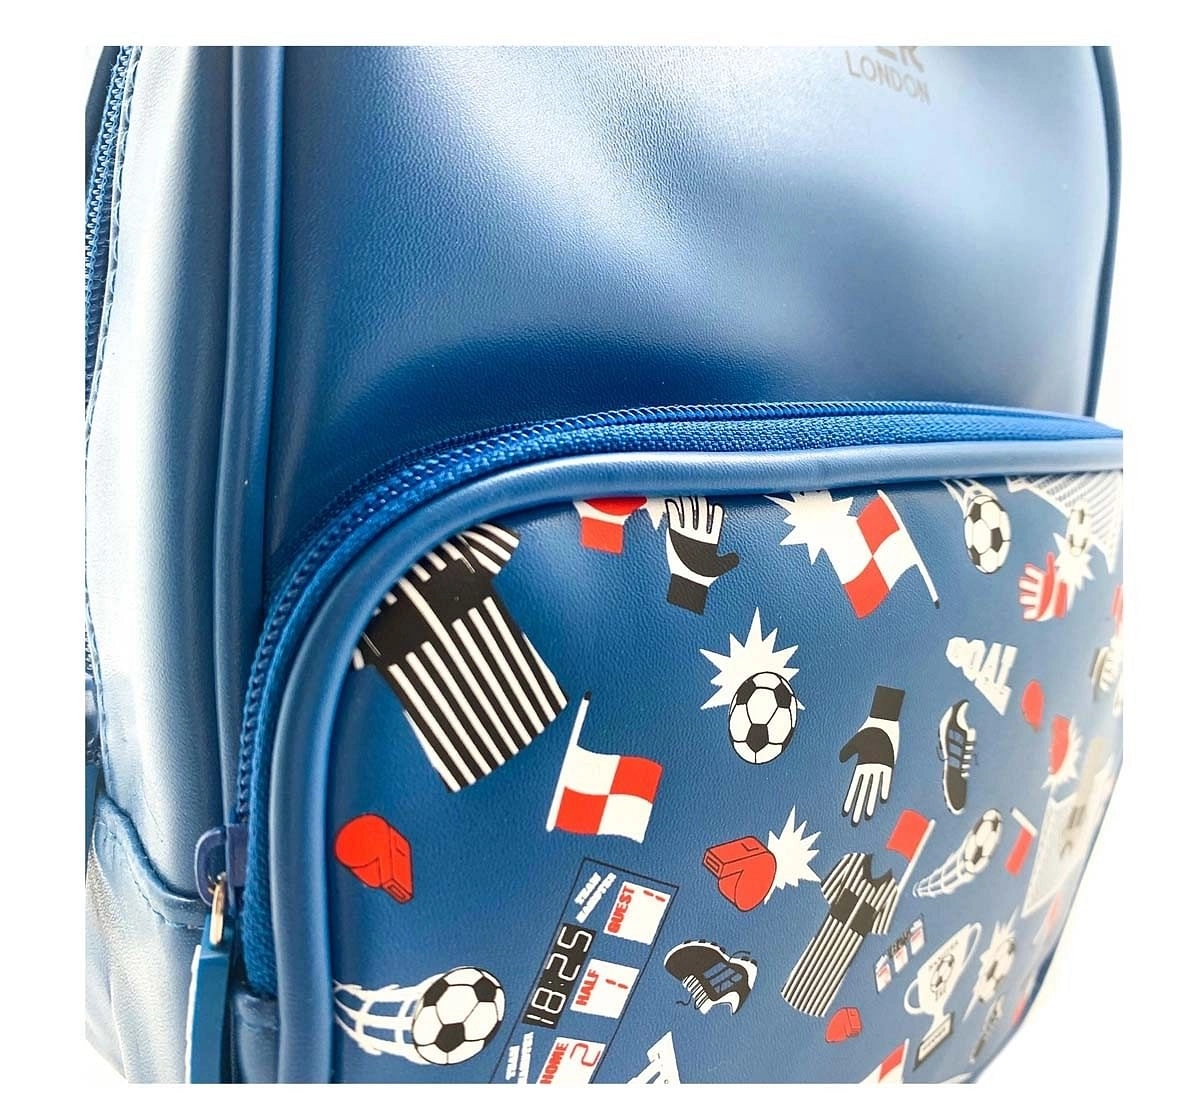 Hamster London Small Football Backpack Bags for Kids Age 3Y+ (Blue)